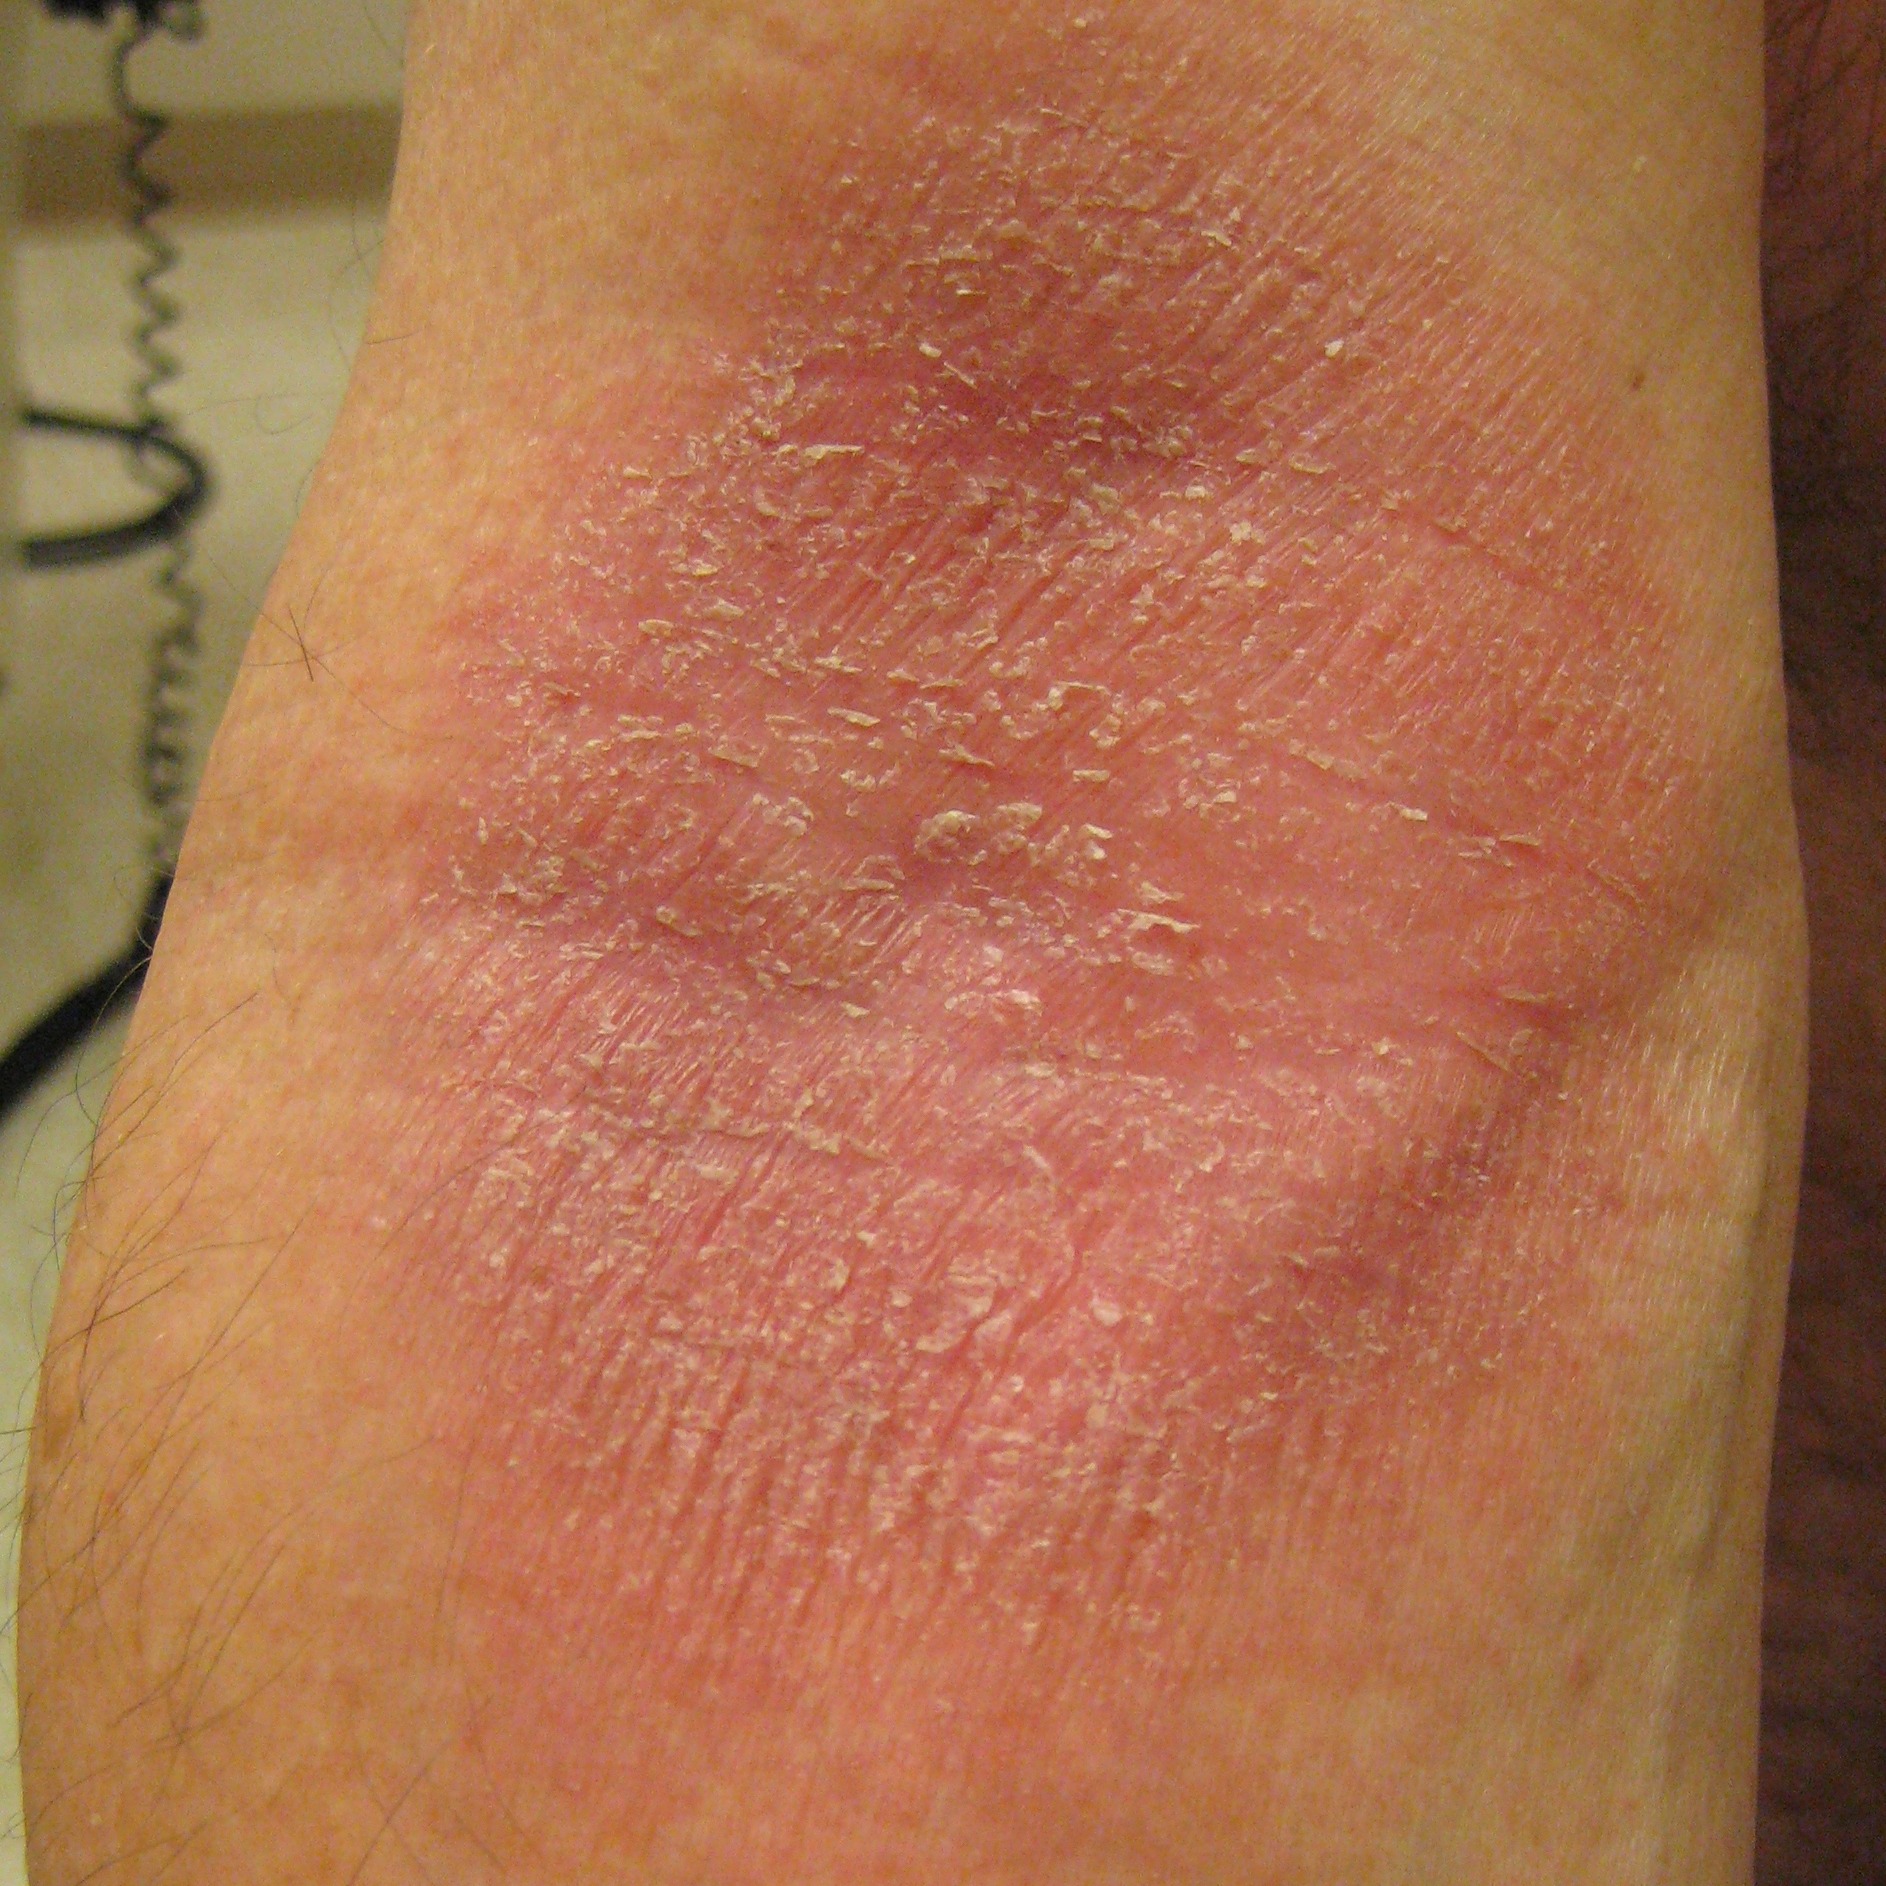 psoriasis on legs only